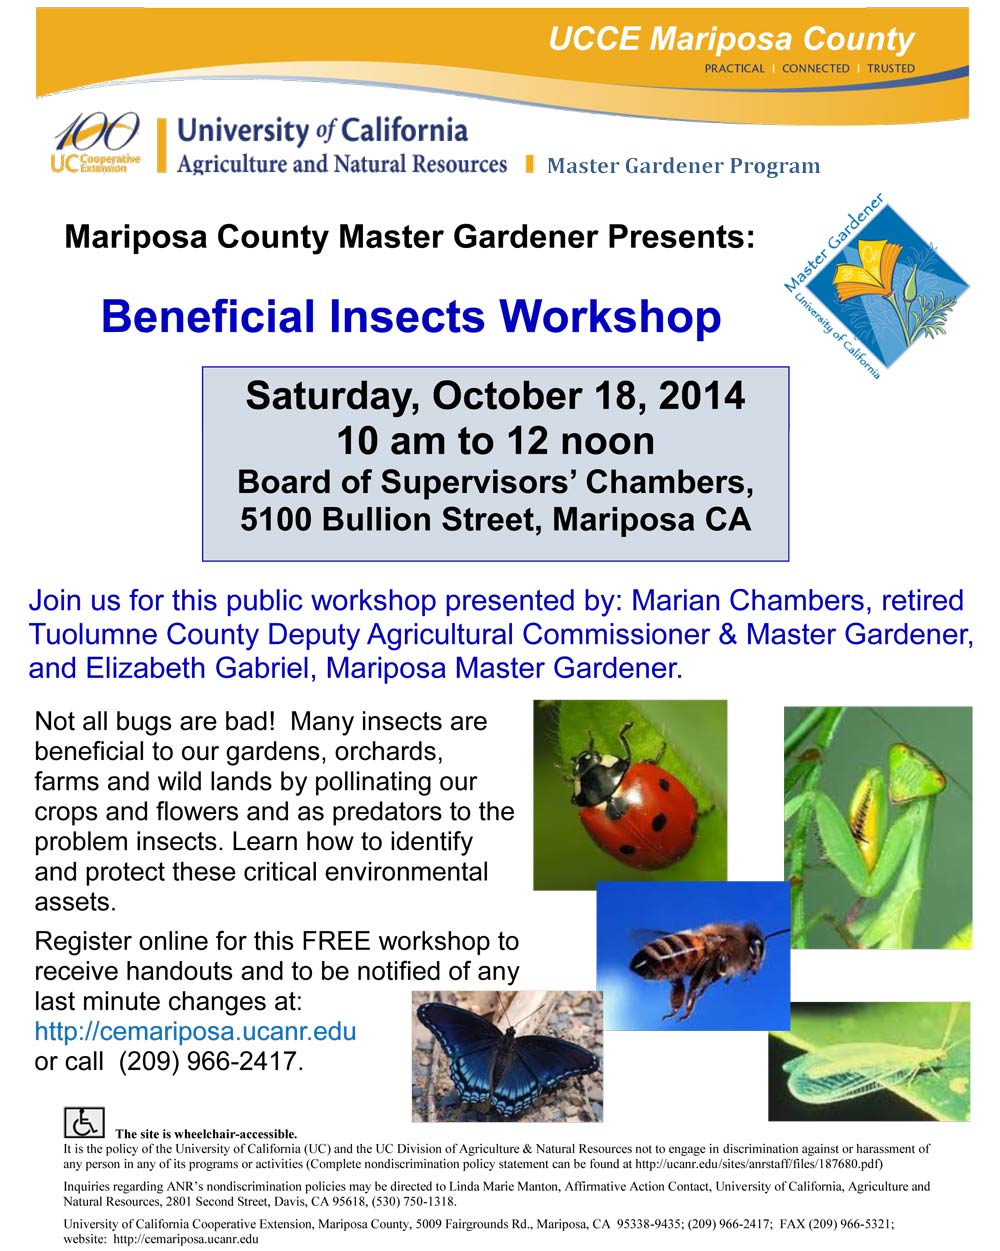 10-18-14-Beneficial-Insect-workshop